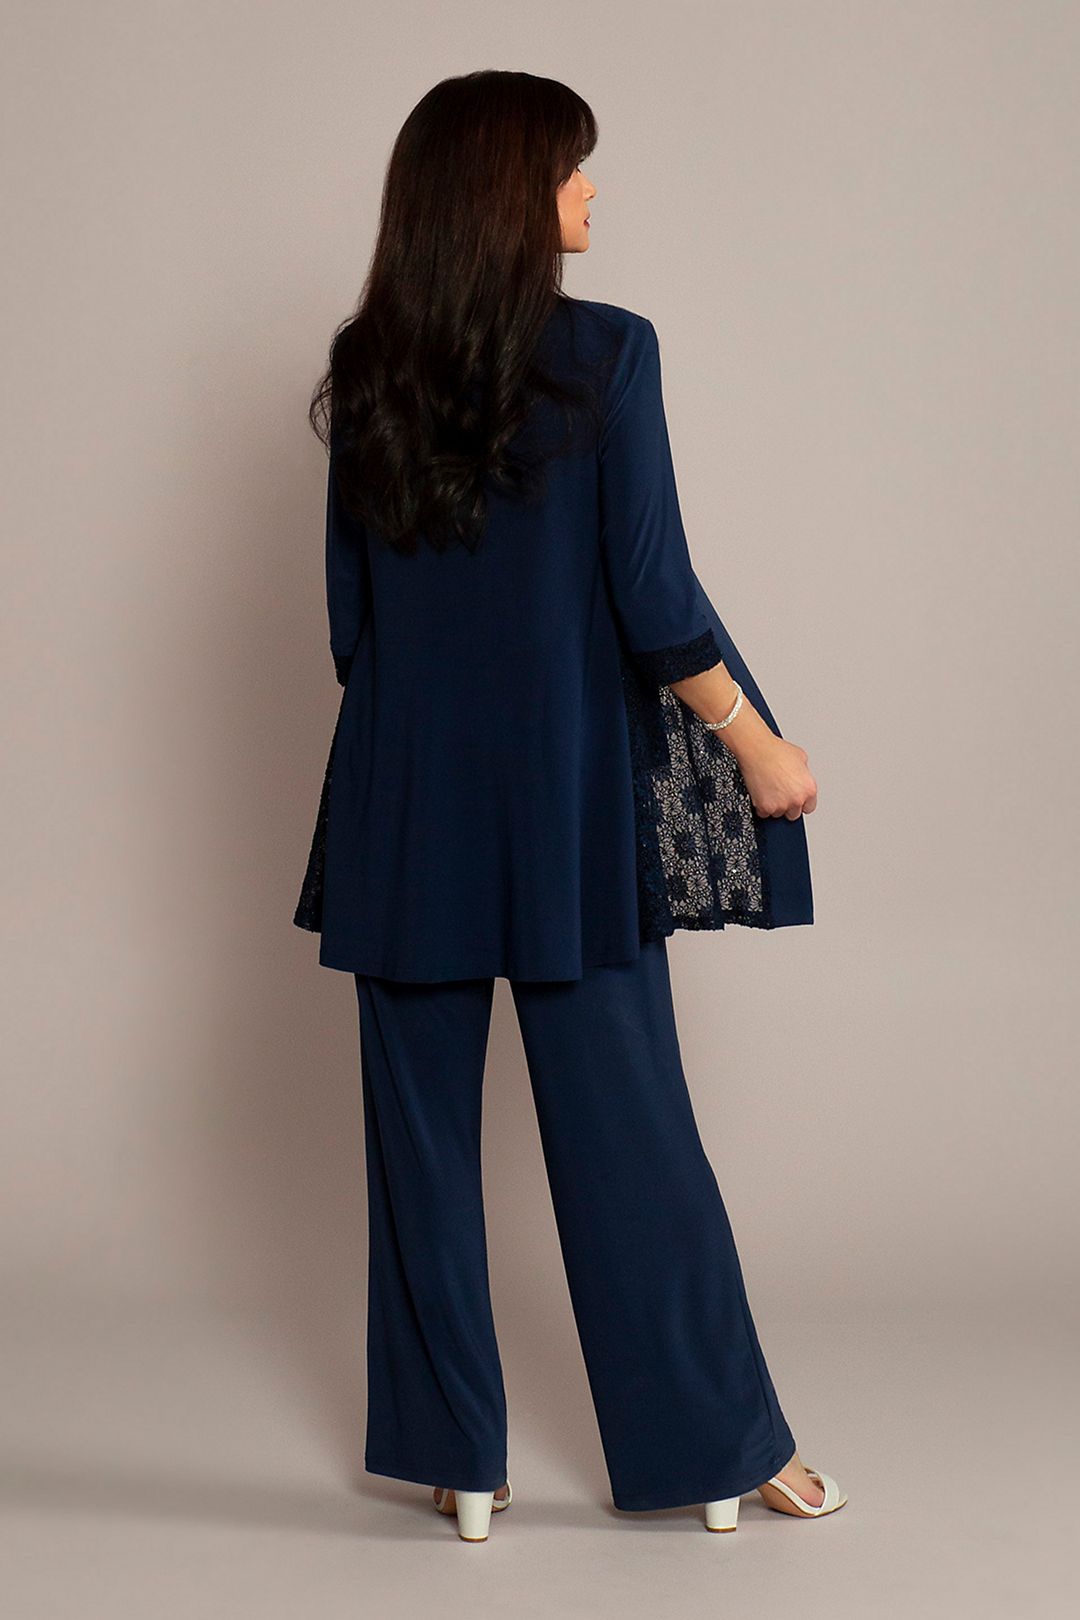 Sequin Lace and Jersey Three-Piece Pantsuit Image 2